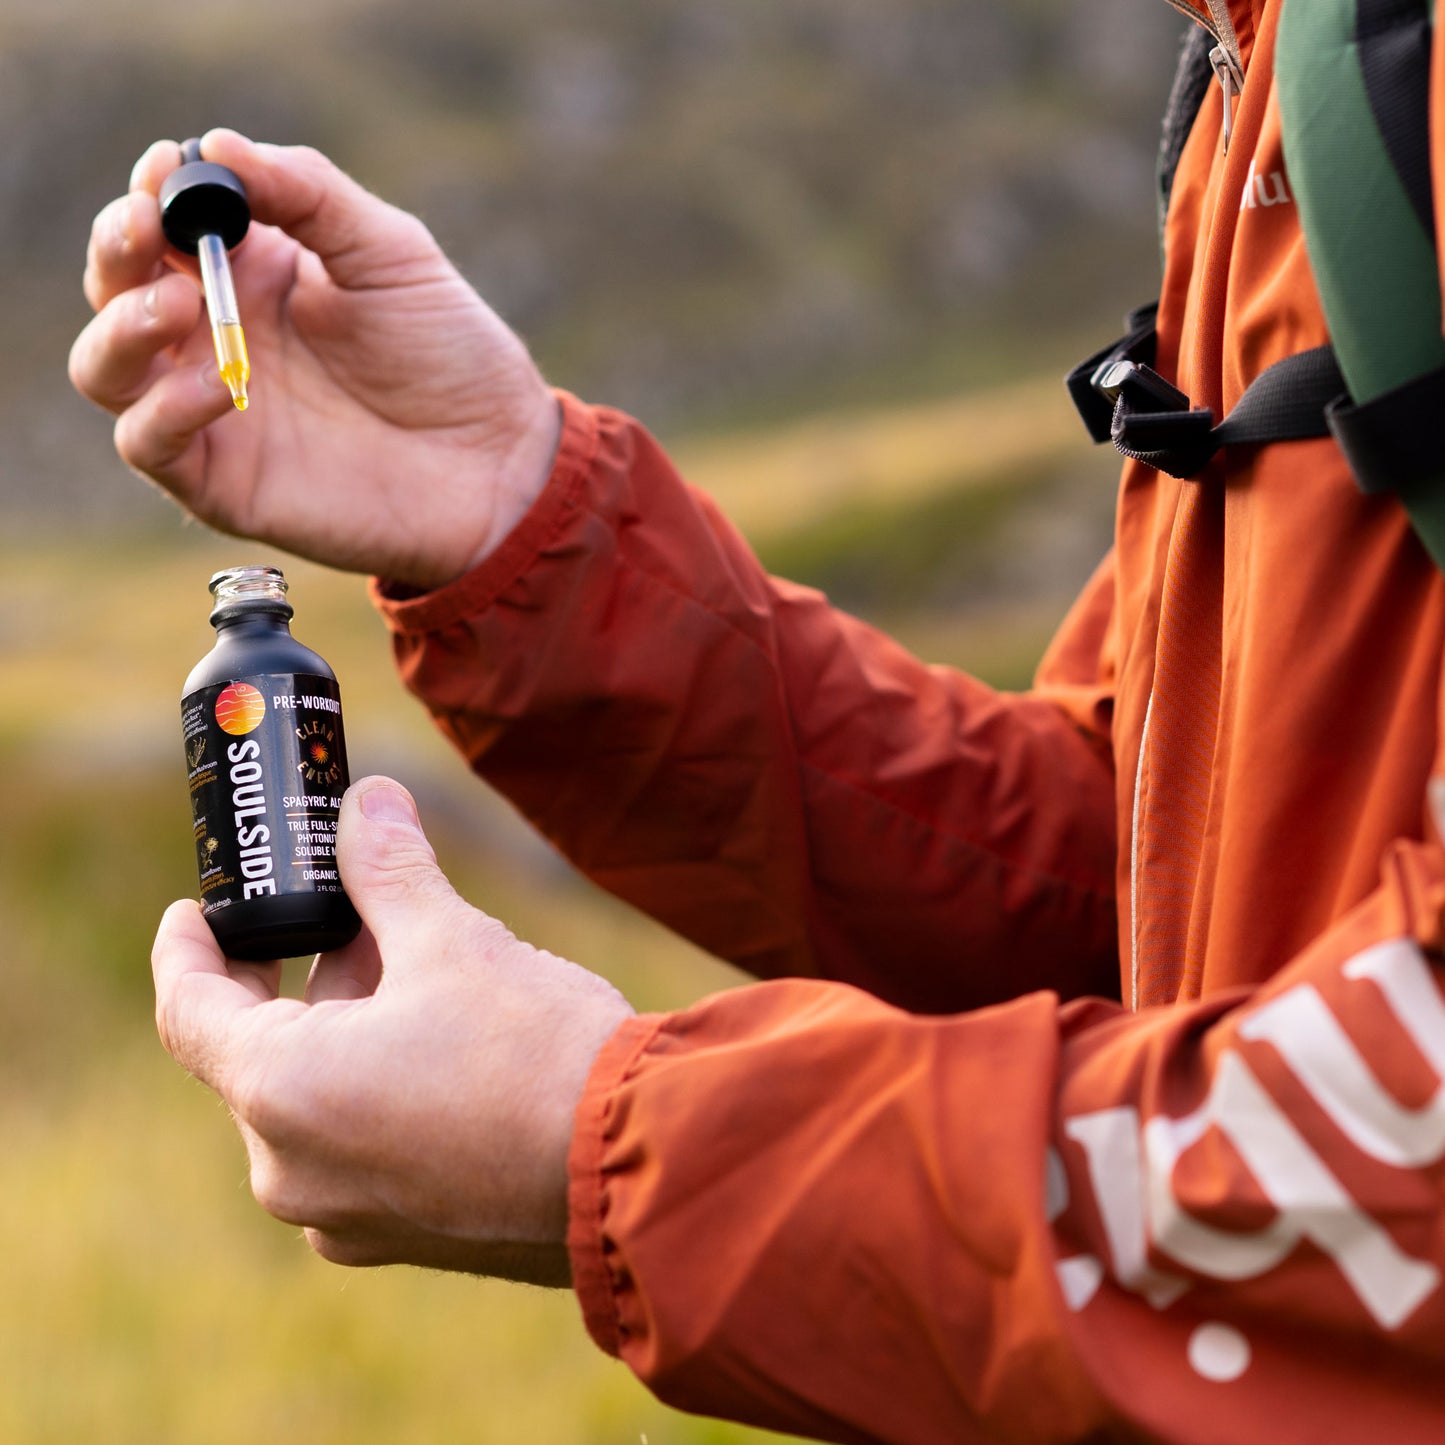 Image of hiker's hands holding Soulside Clean Energy natural herbal supplement for natural energy, focus, endurance, athletic performance and stamina.